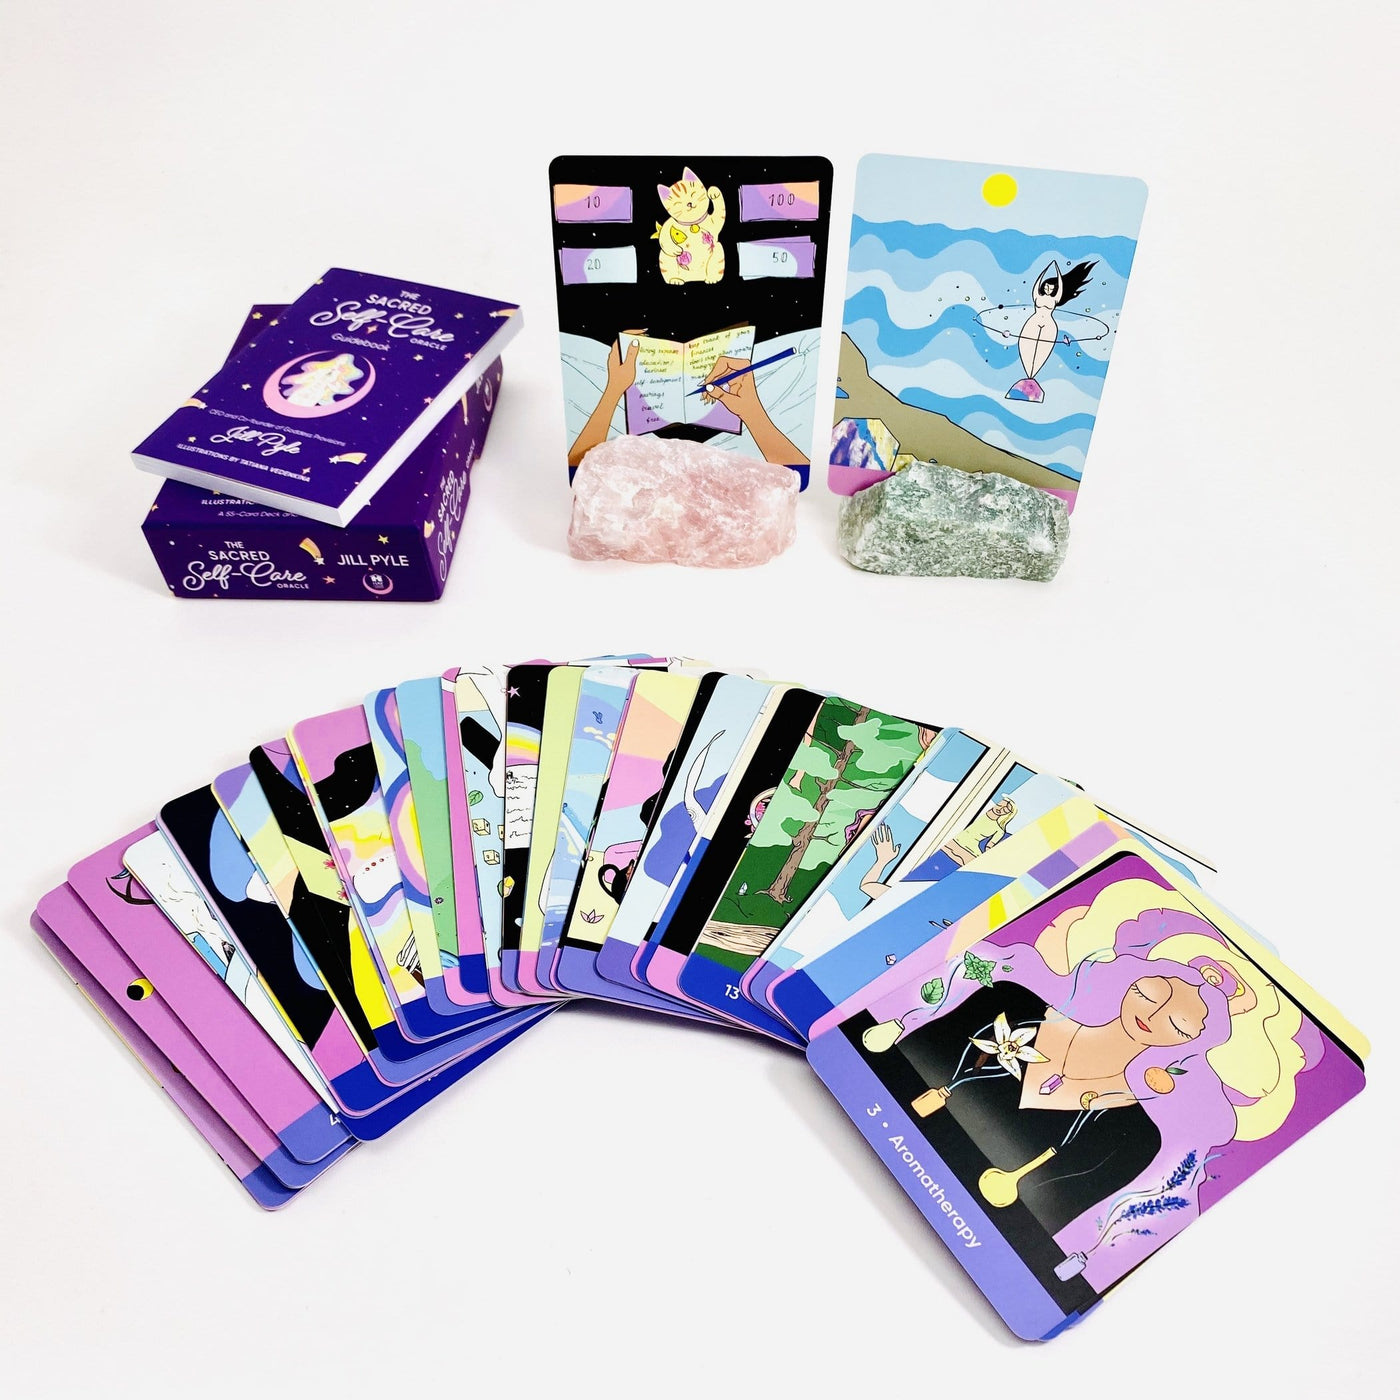 A 55-card deck and guidebook.